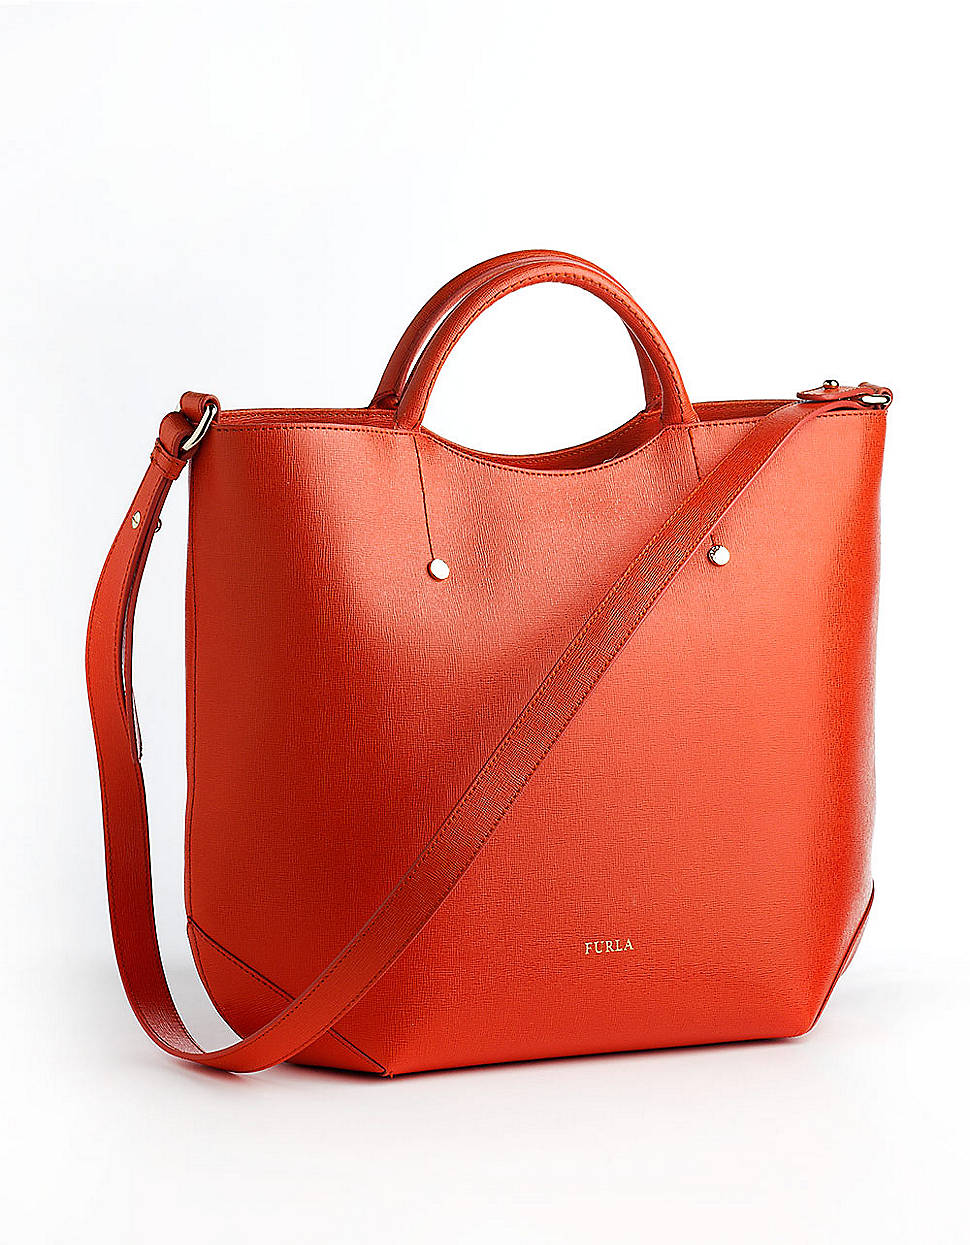 Furla Arianna Leather Tote Bag in Red - Lyst